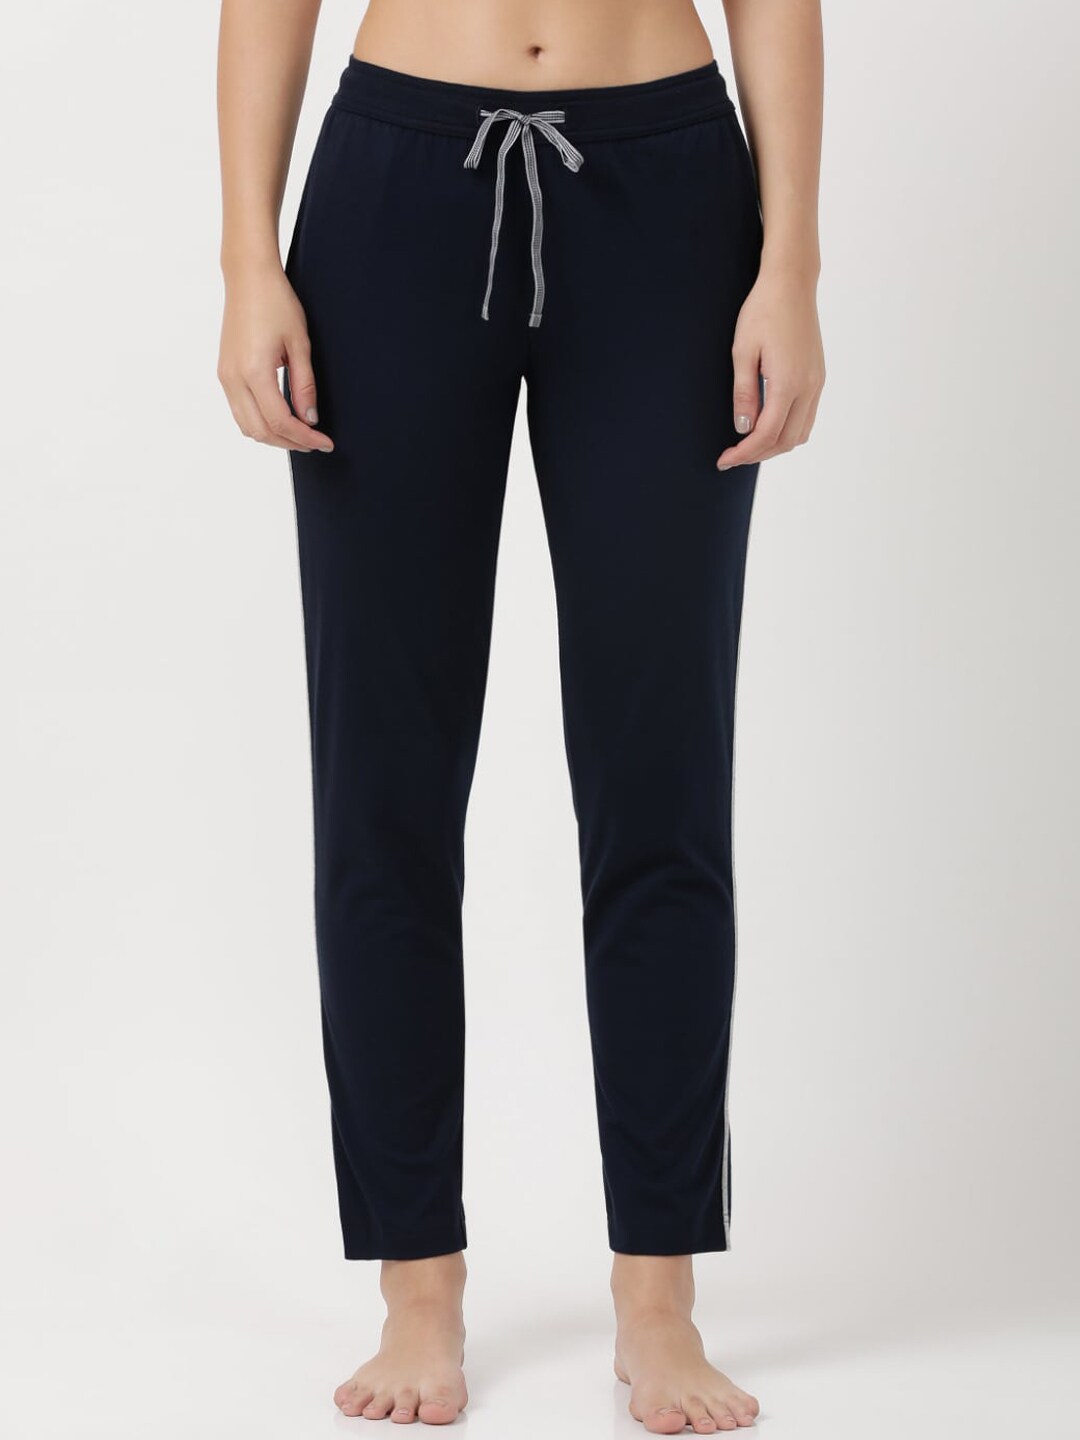 Jockey Women Navy Blue Solid Relaxed-Fit Lounge Pants Price in India